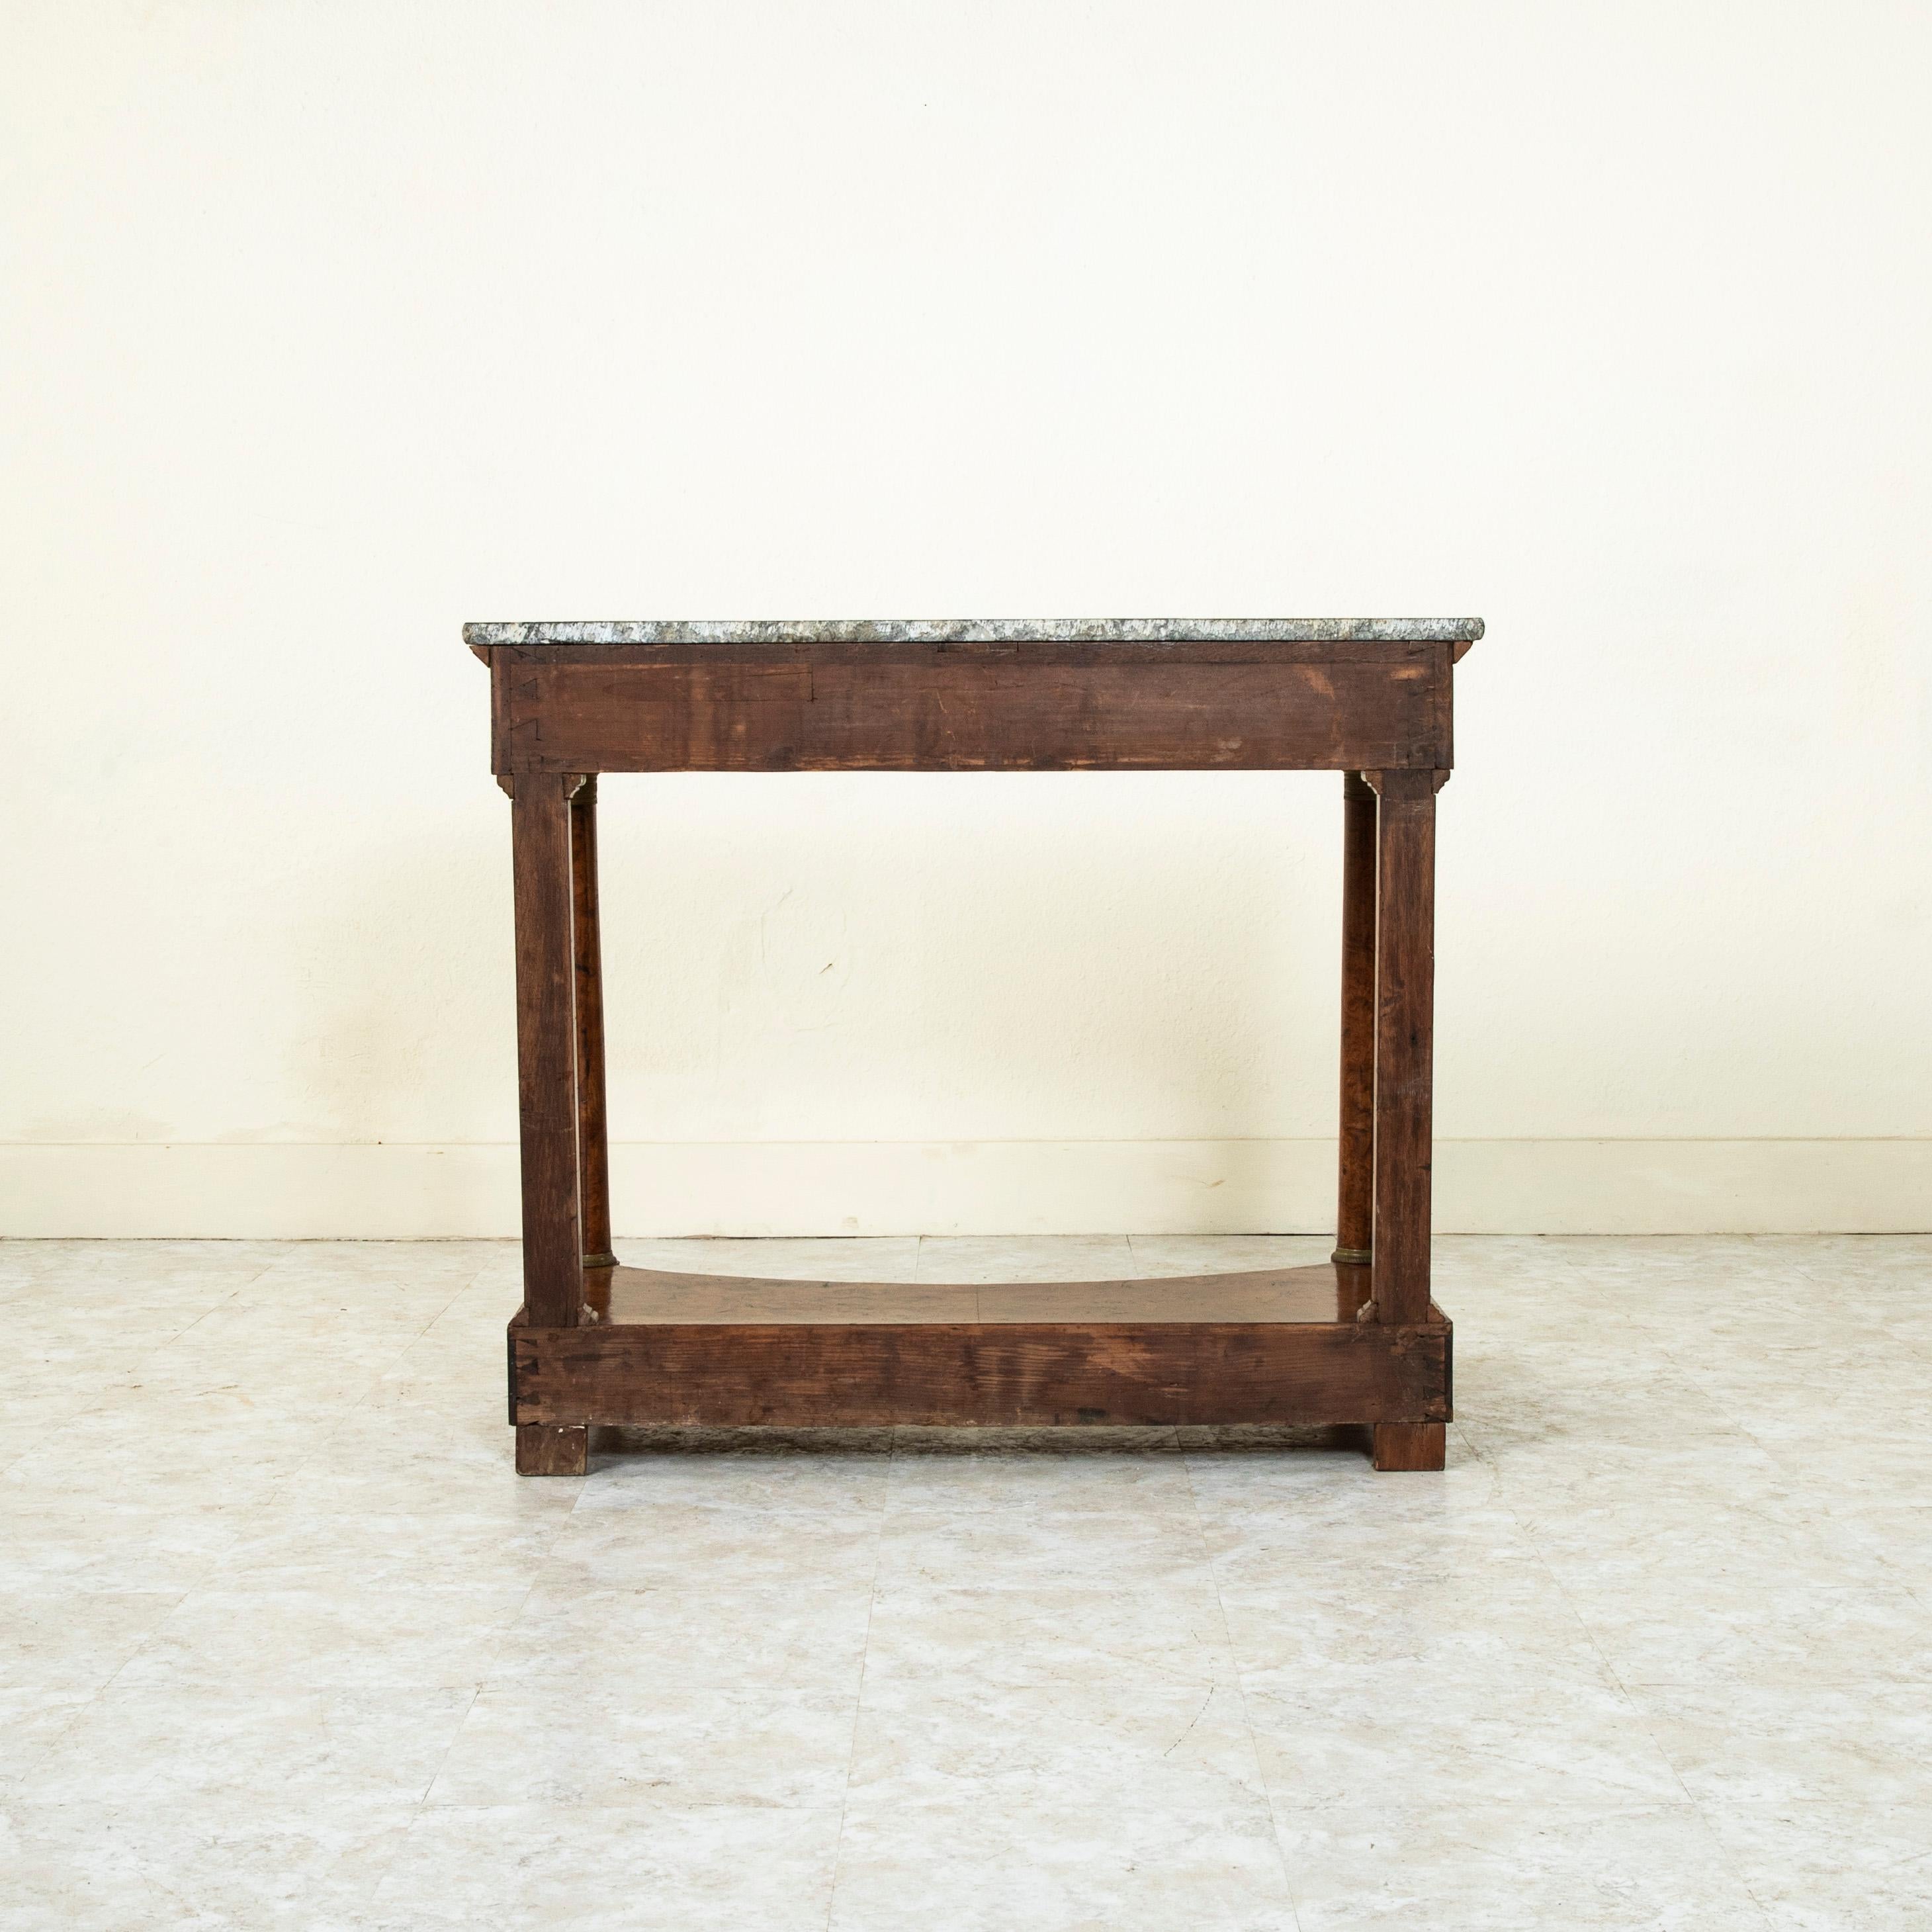 Early 19th Century French Empire Period Burl Walnut Console Table, Marble Top 1